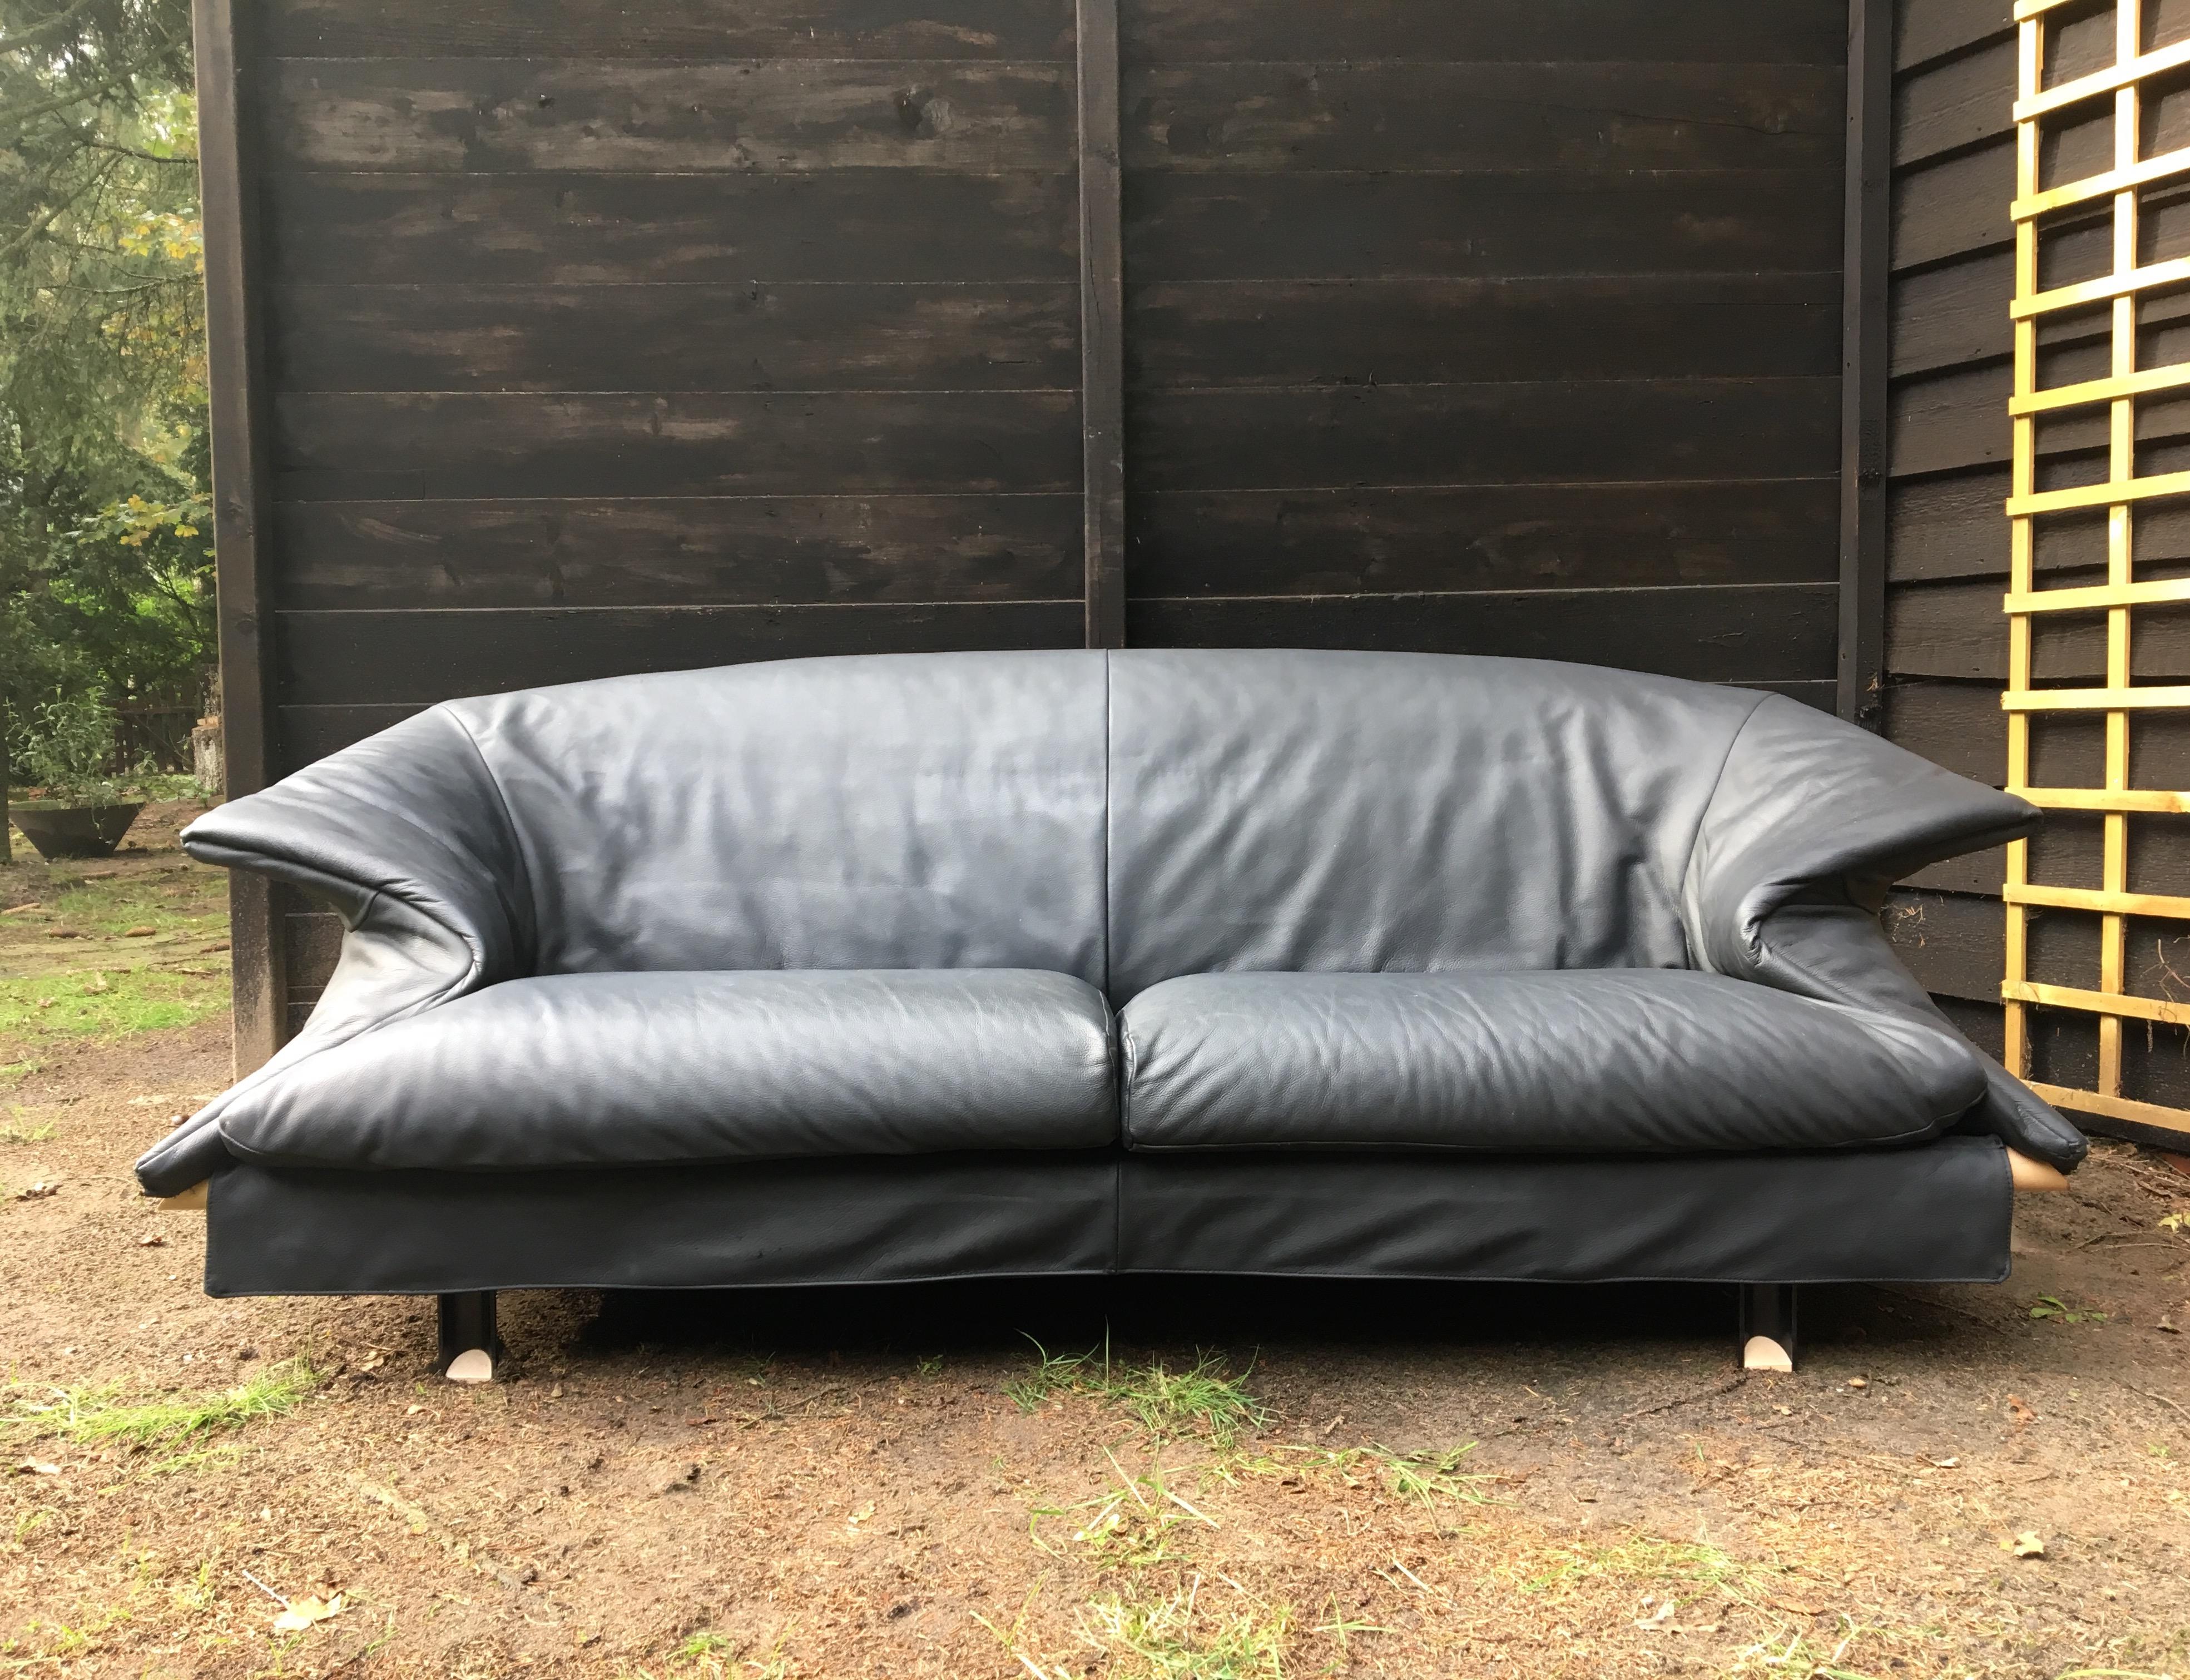 Striking anthracite / Dark Blue / Grey Leather sofa manufactured by Saporiti circa1980s. Its design is definitely inspired by designs of the Memphis Group. The sofa remains in fair condition, with some discoloration (mostly when cushions are being